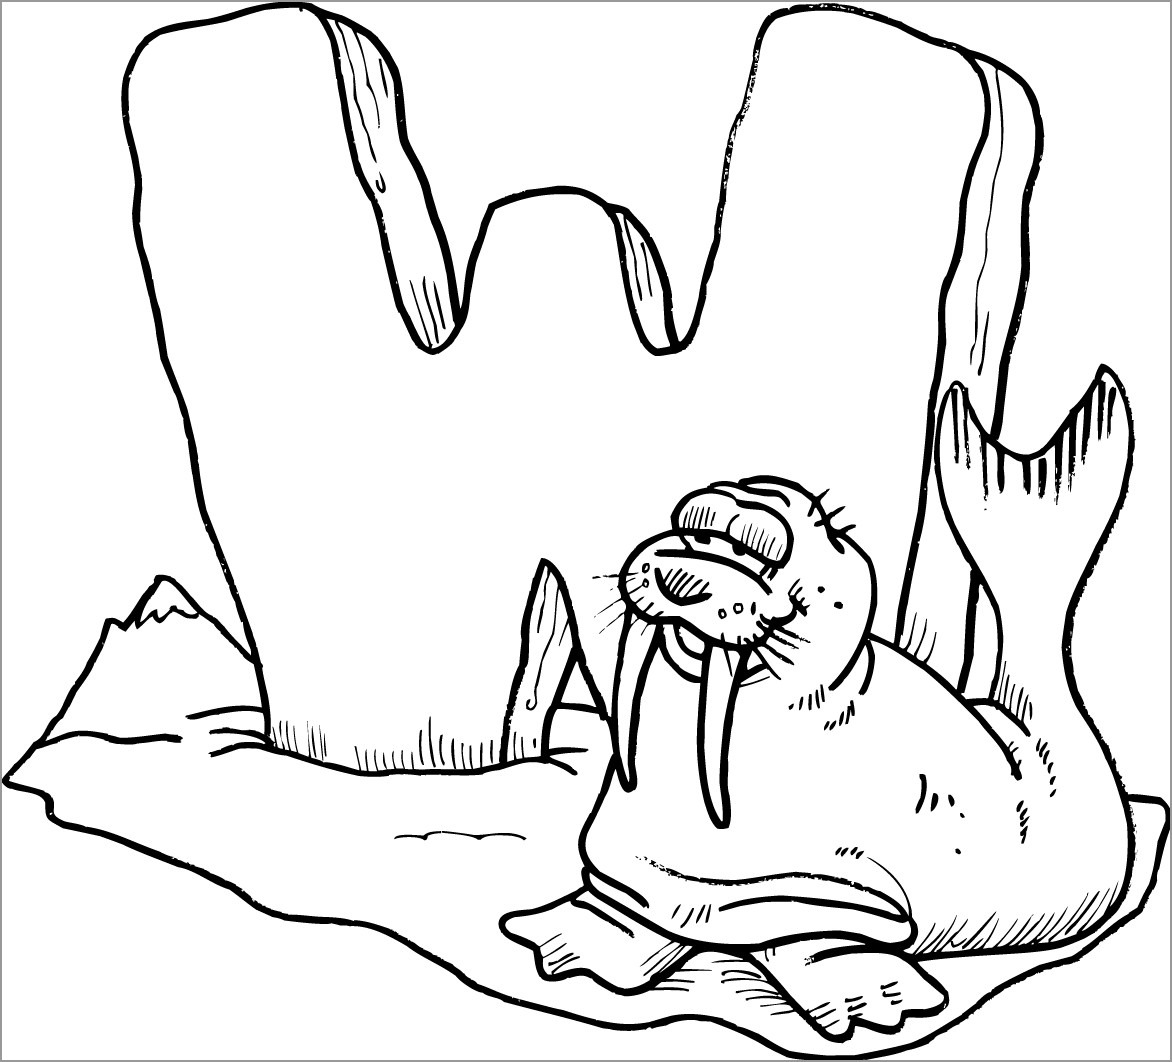 Free Walrus Coloring Page